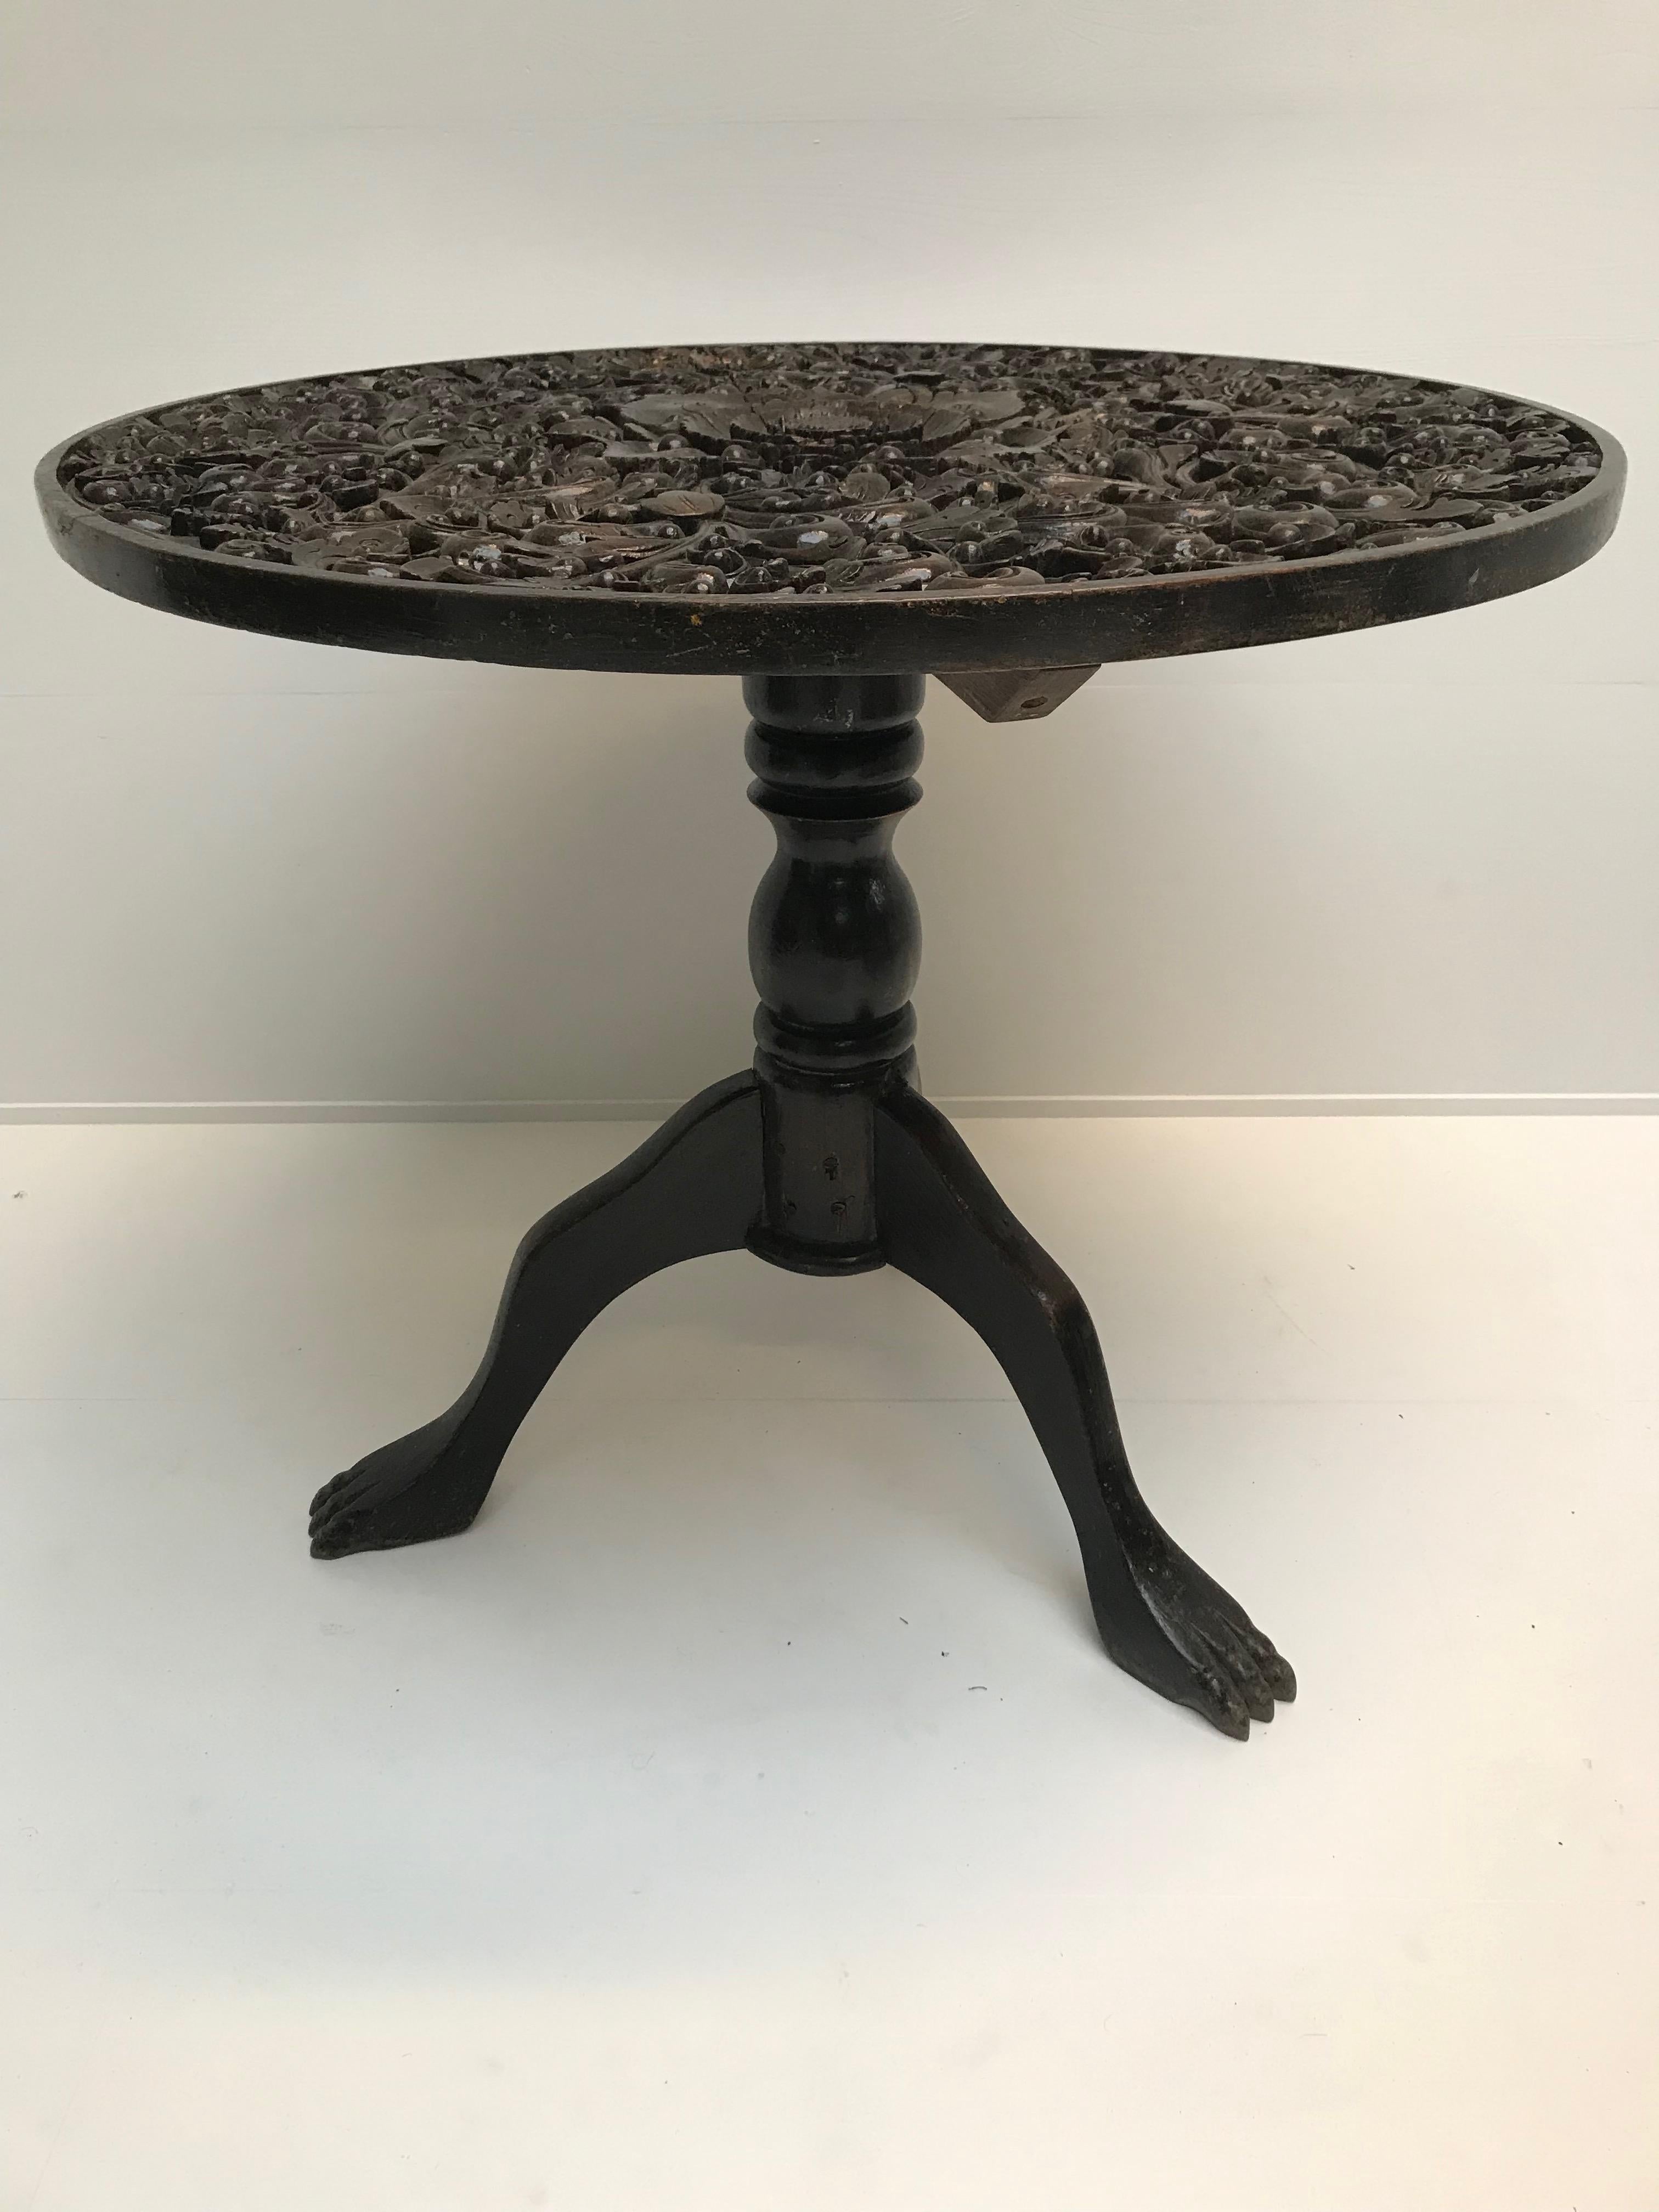 Carved Teak Pedestal Table In Good Condition For Sale In Schellebelle, BE